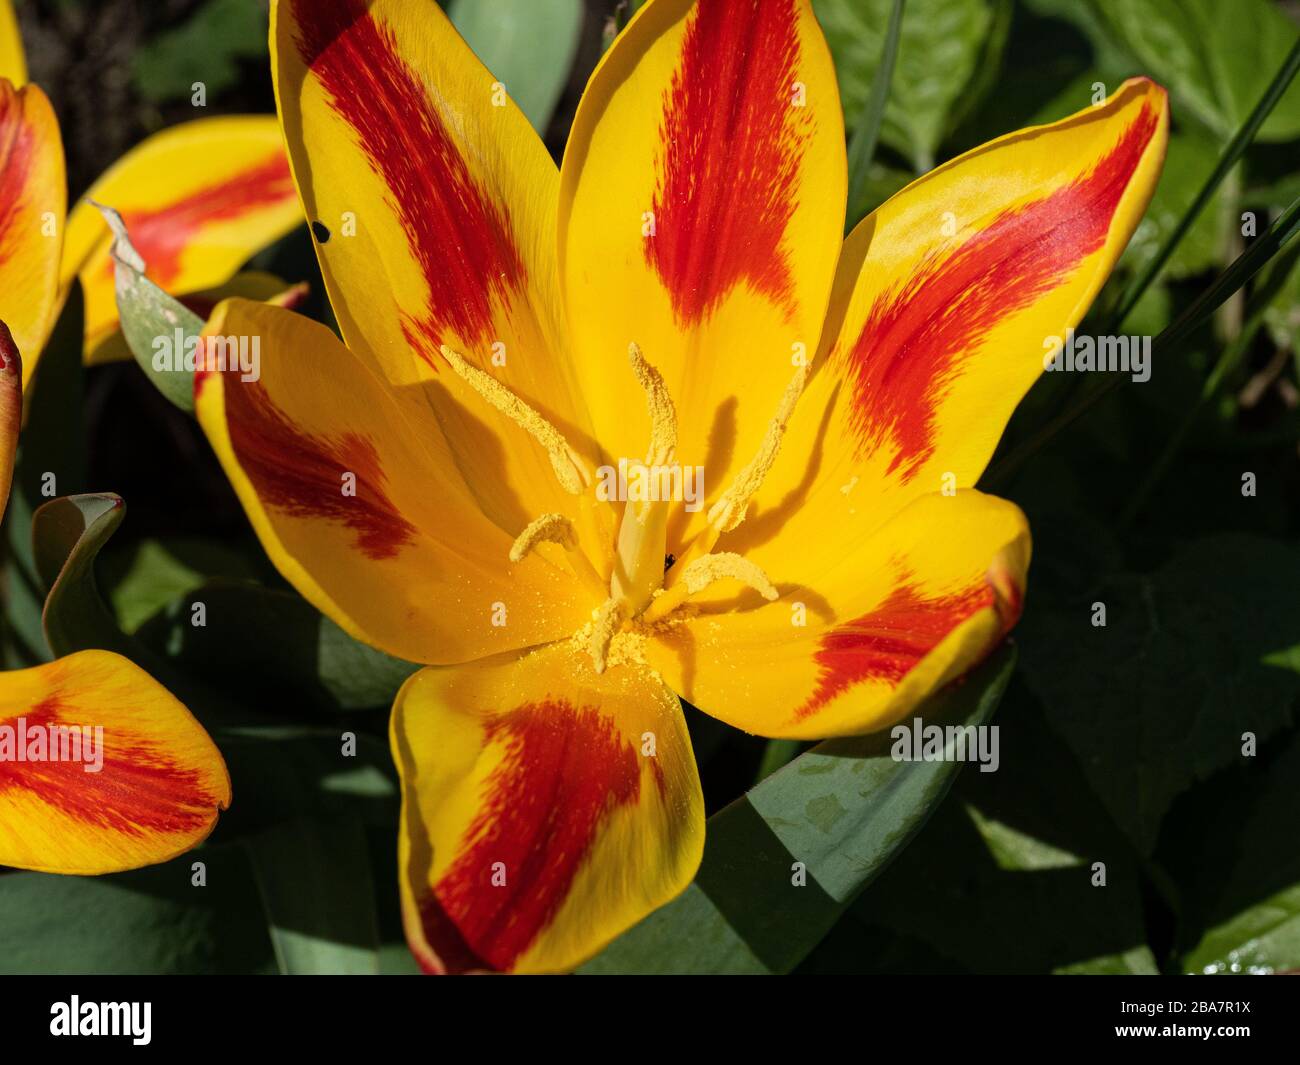 A close up of a single red and yellow flower of the Tulip Spanish Flag Stock Photo